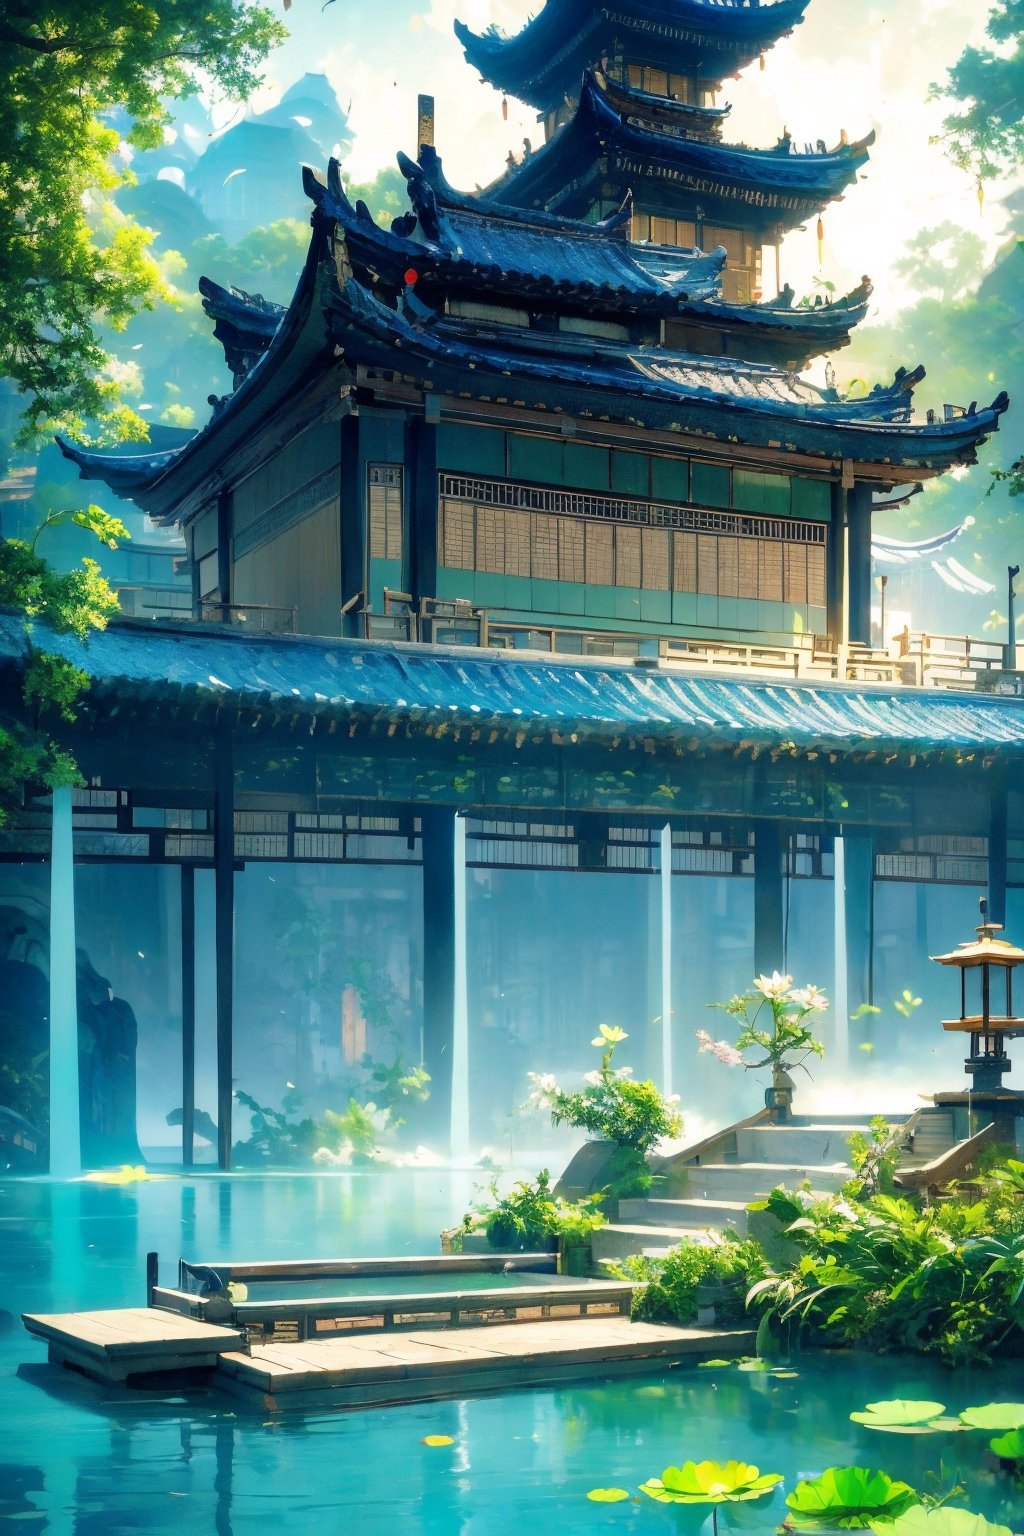 outdoors, sky, cloud, water, tree, no humans, building, scenery, reflection, lantern, stairs, architecture, east asian architecture,Chinese Architecture,blue moon, blue lotus pond,Surreal composition,Buildings scattered high and low,looking down from the sky, looking down, overlooking perspective,Picture from top to bottom,Many green plants